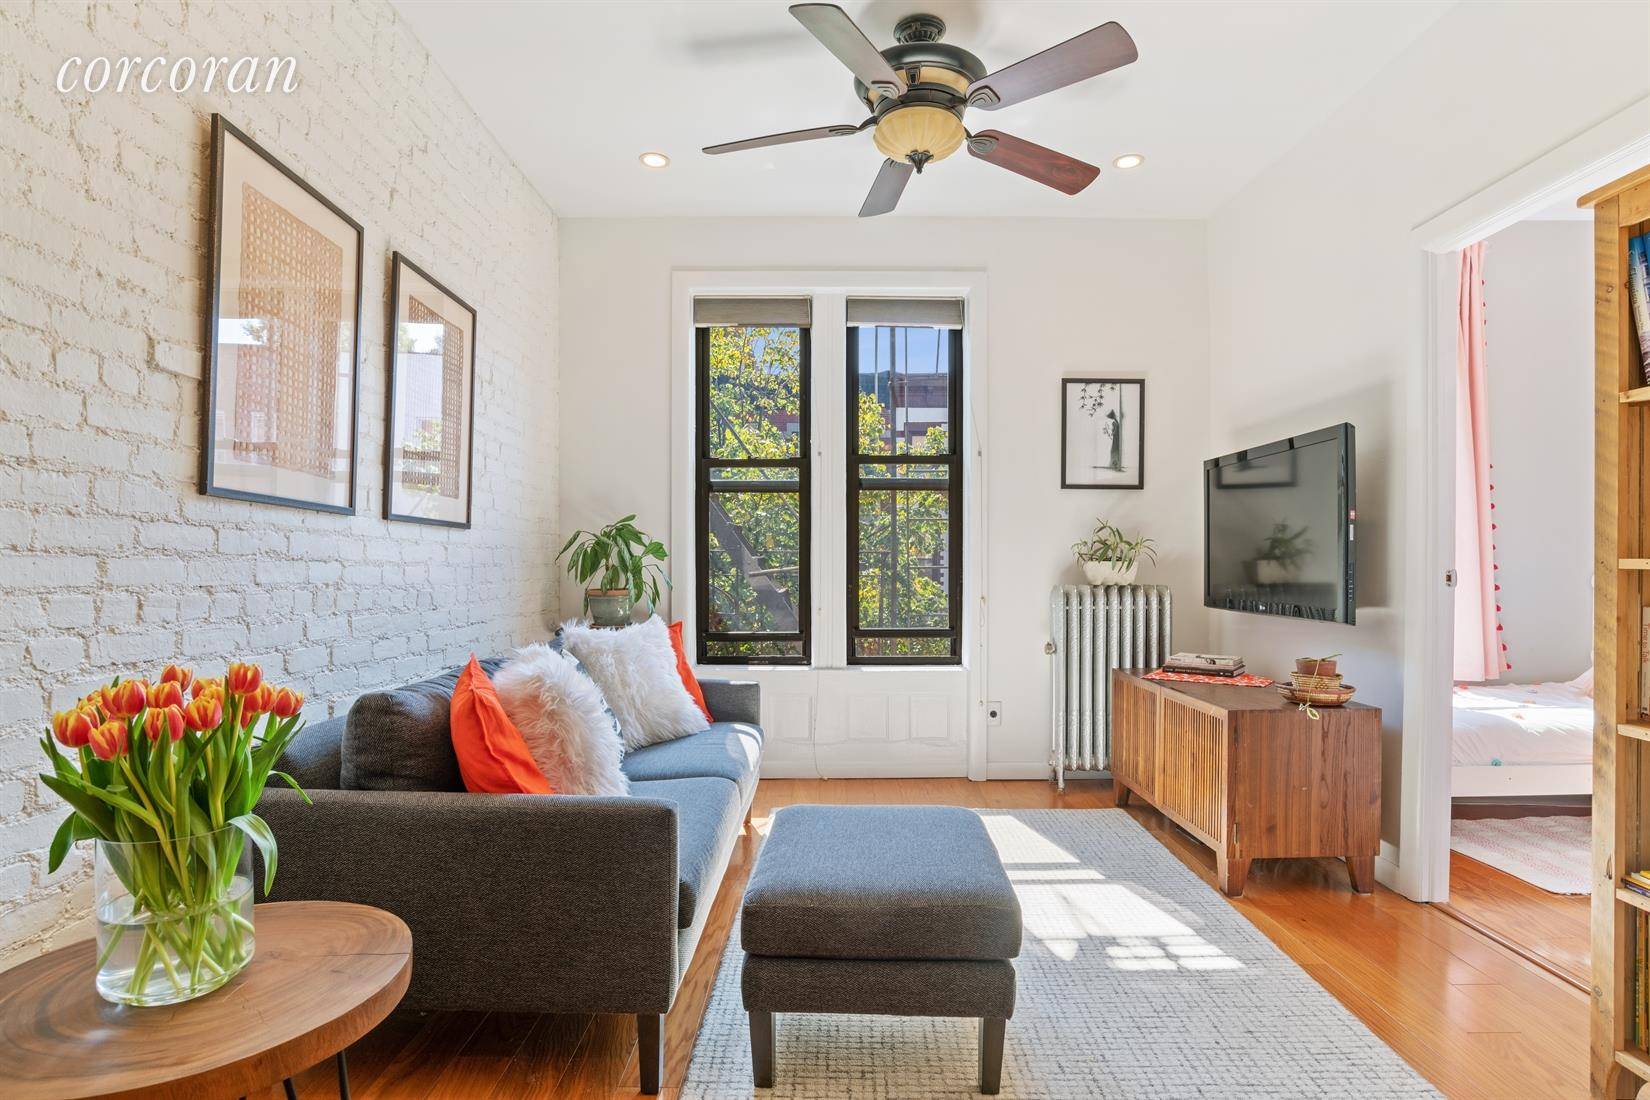 Charming second story three bedroom apartment on tree lined 15th Street between 8th Avenue and Prospect Park.